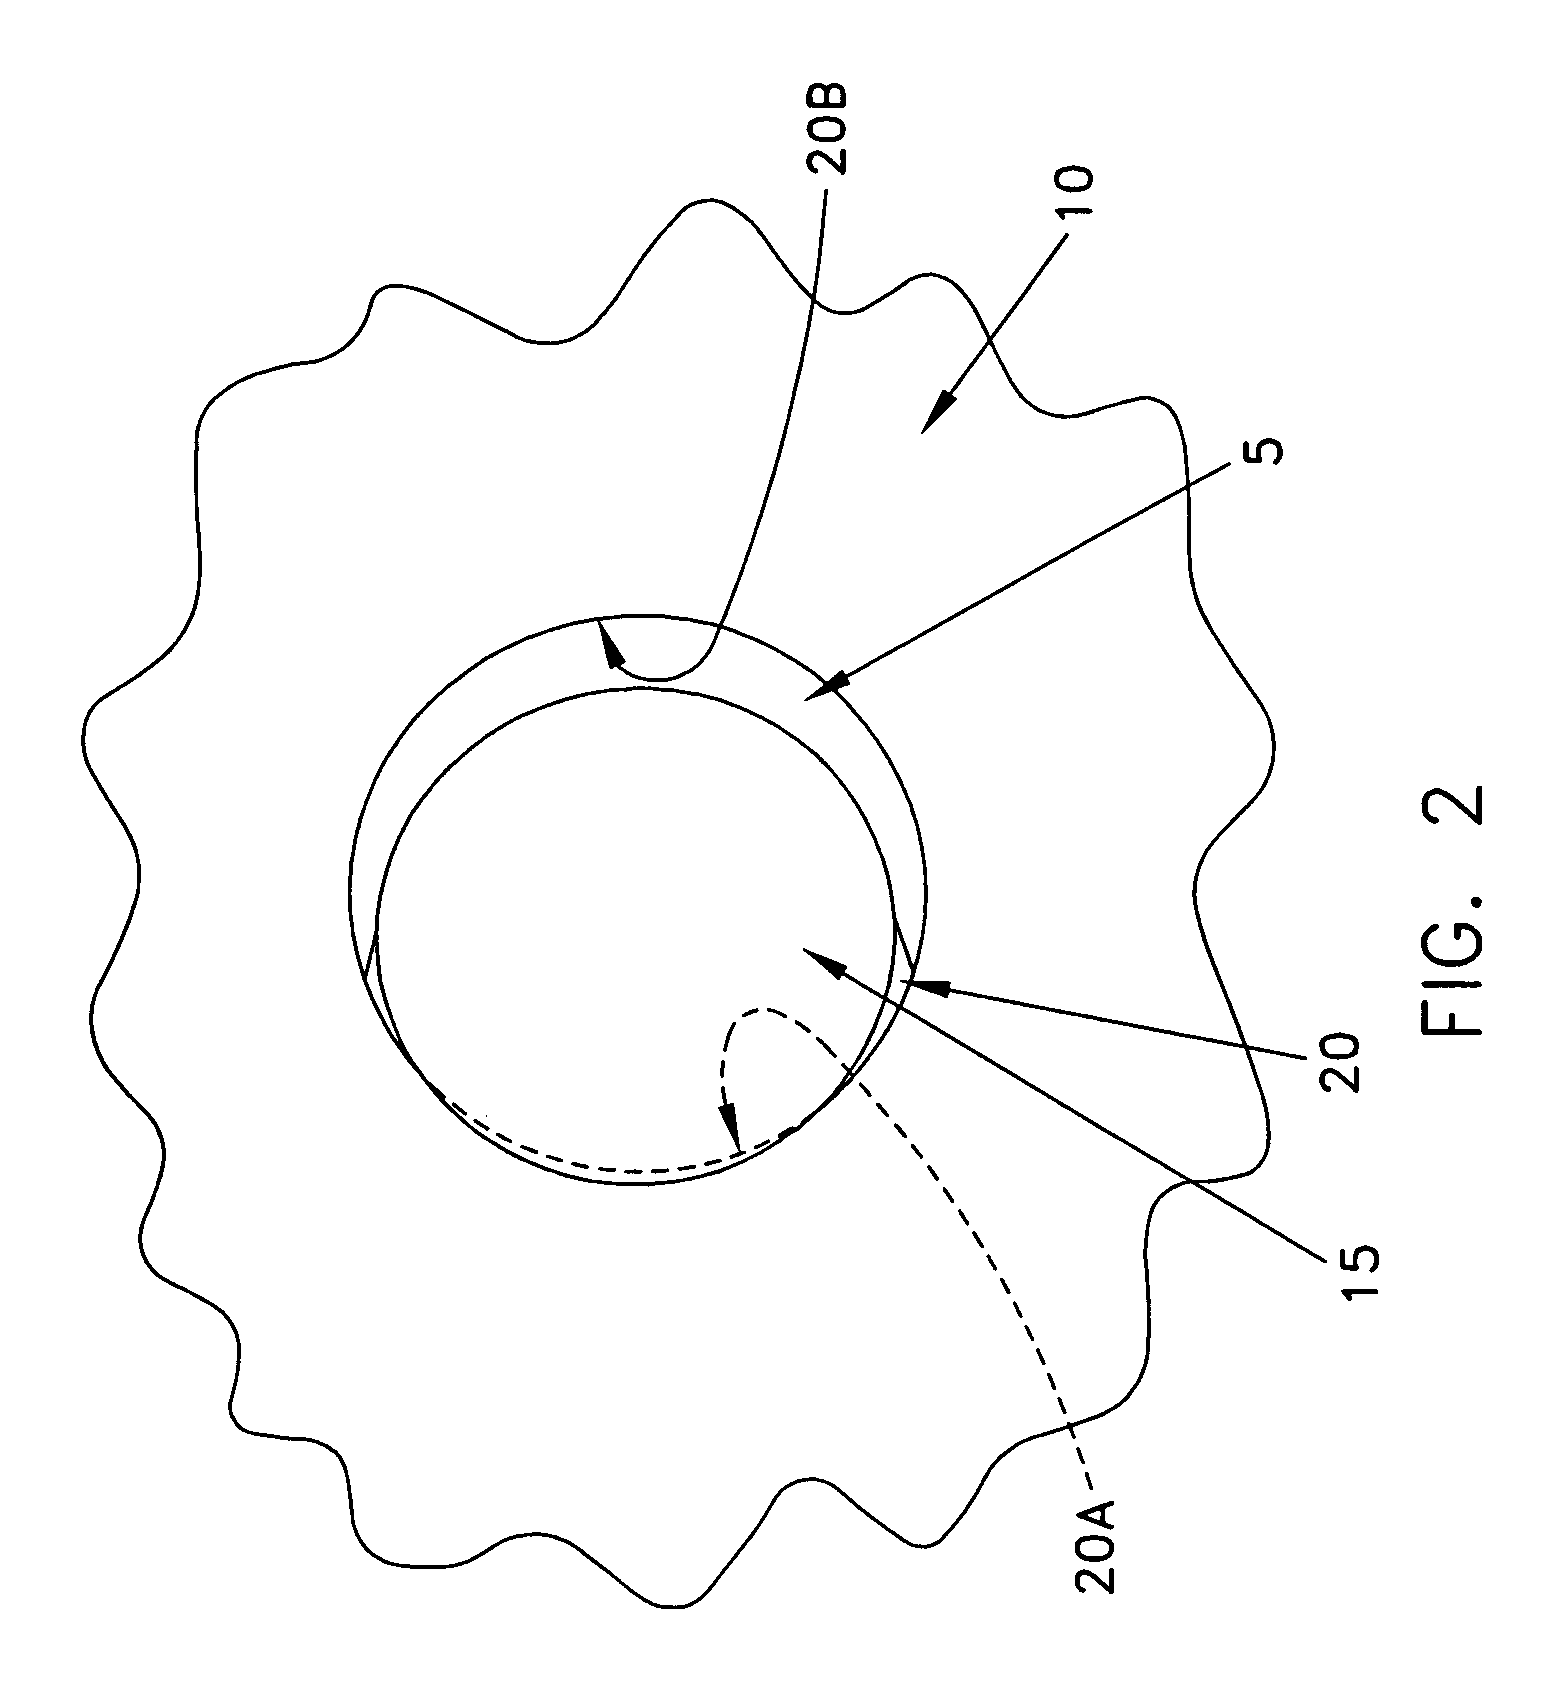 Composite interference screw for attaching a graft ligament to a bone, and other apparatus for making attachments to bone